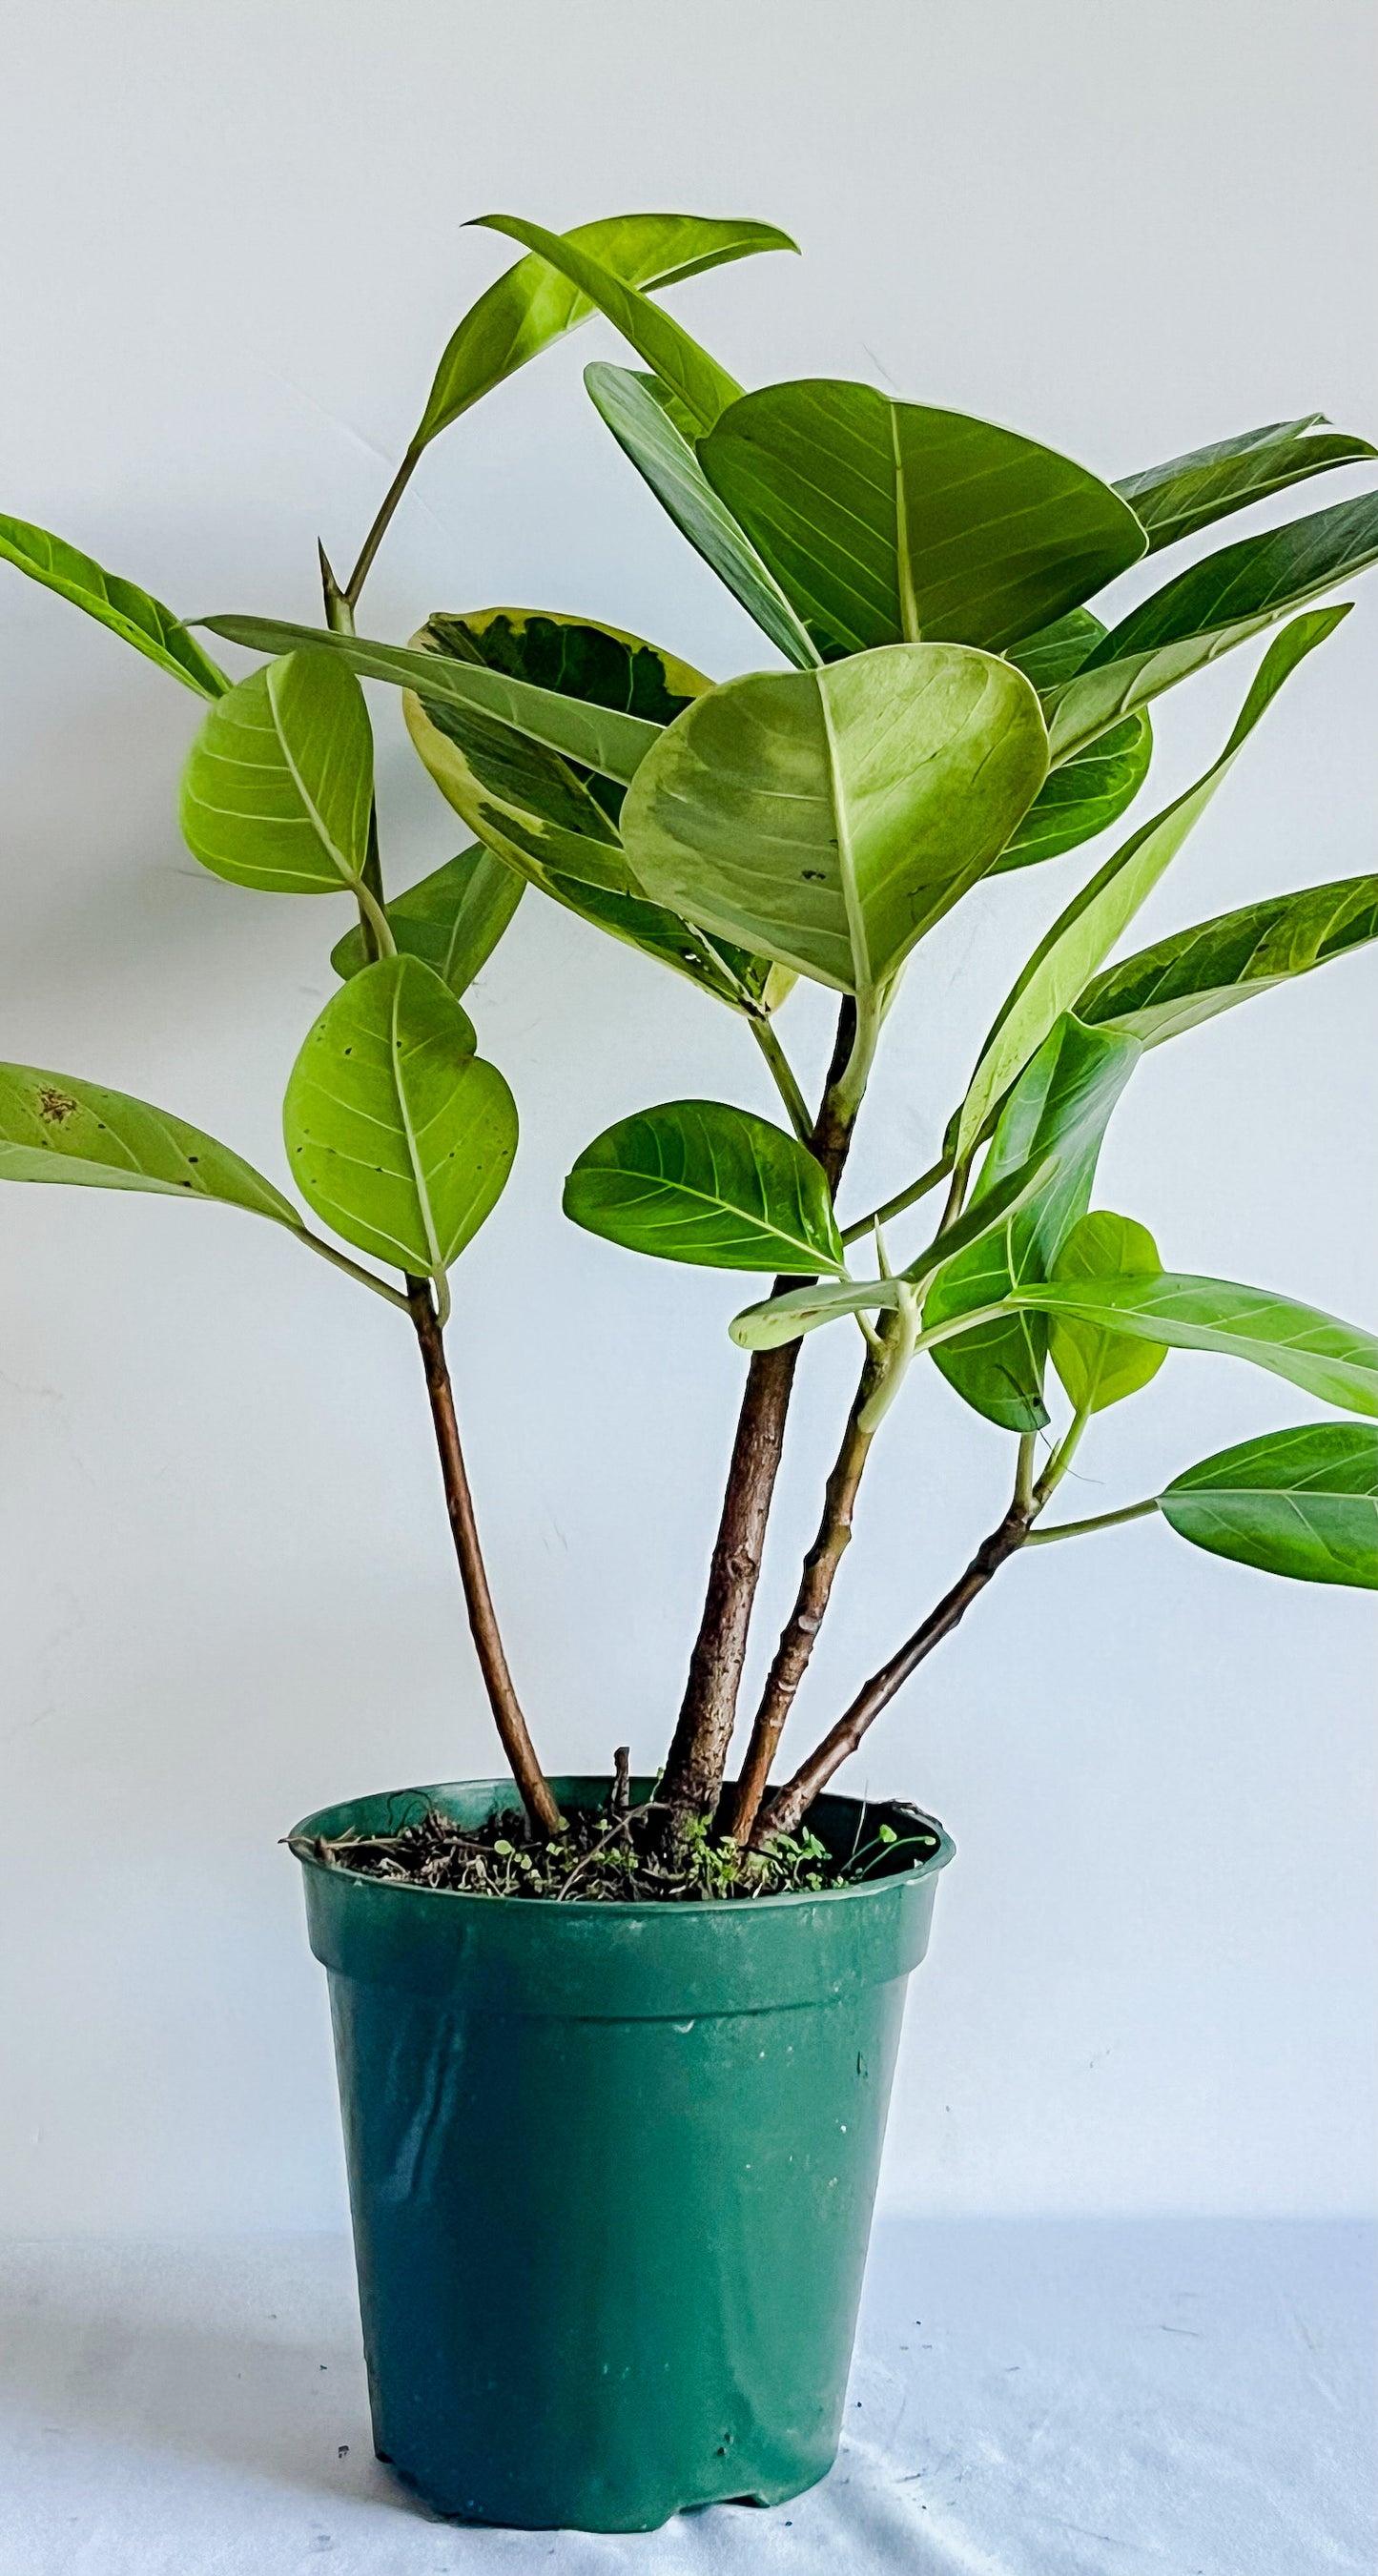 Ficus Altissima 'Yellow Gem' Rubber Tree Plant- Stunning, Vibrant, Yellow- Lime Green Variegated Leaves- Tropical Tree Houseplant (4" or 6" Pot)